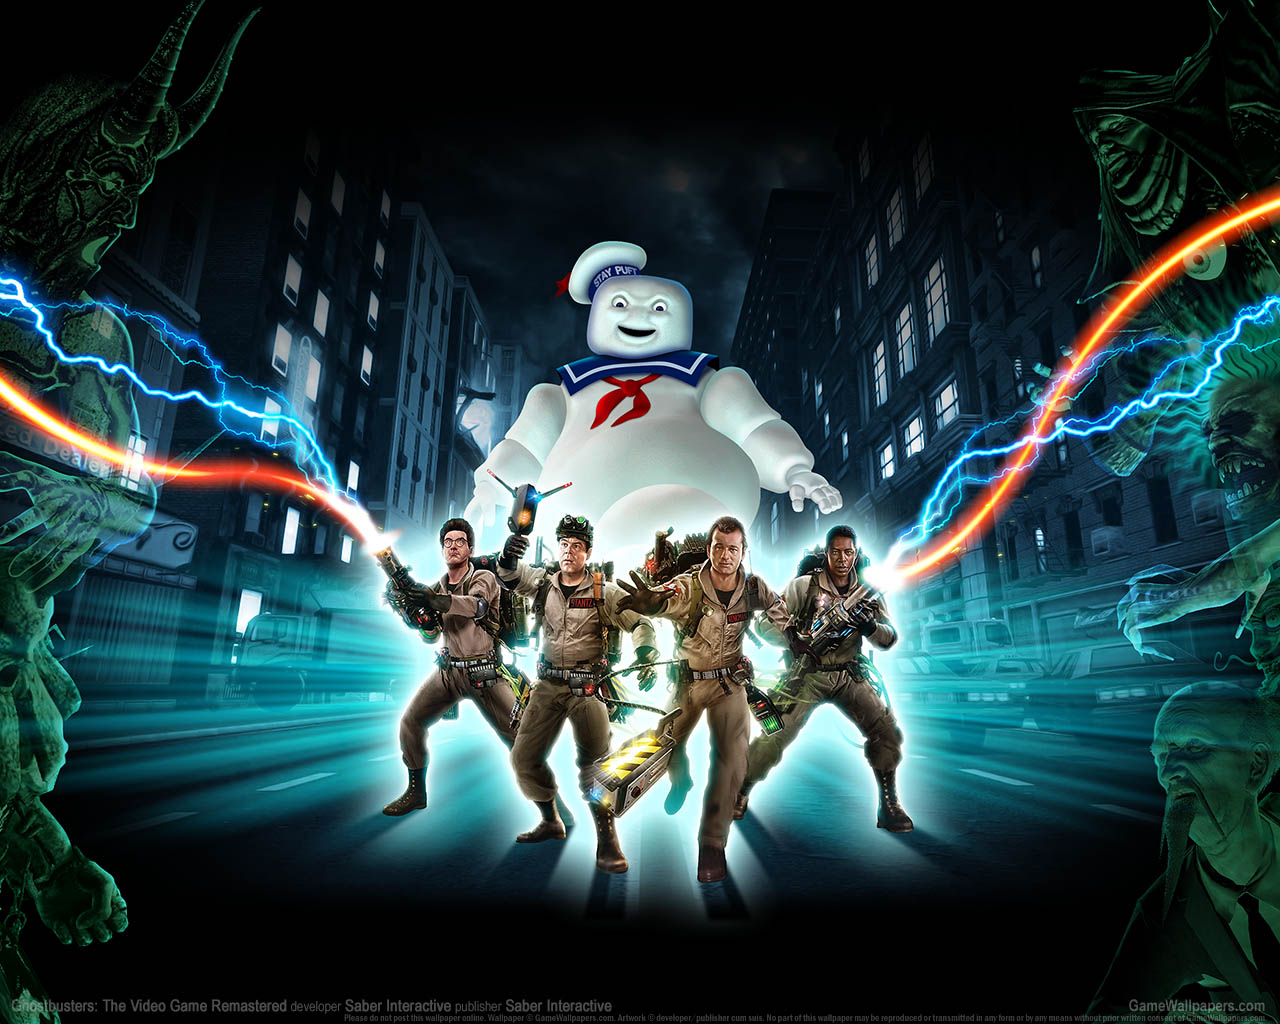 Ghostbusters%3A The Video Game Remastered Hintergrundbild 01 1280x1024